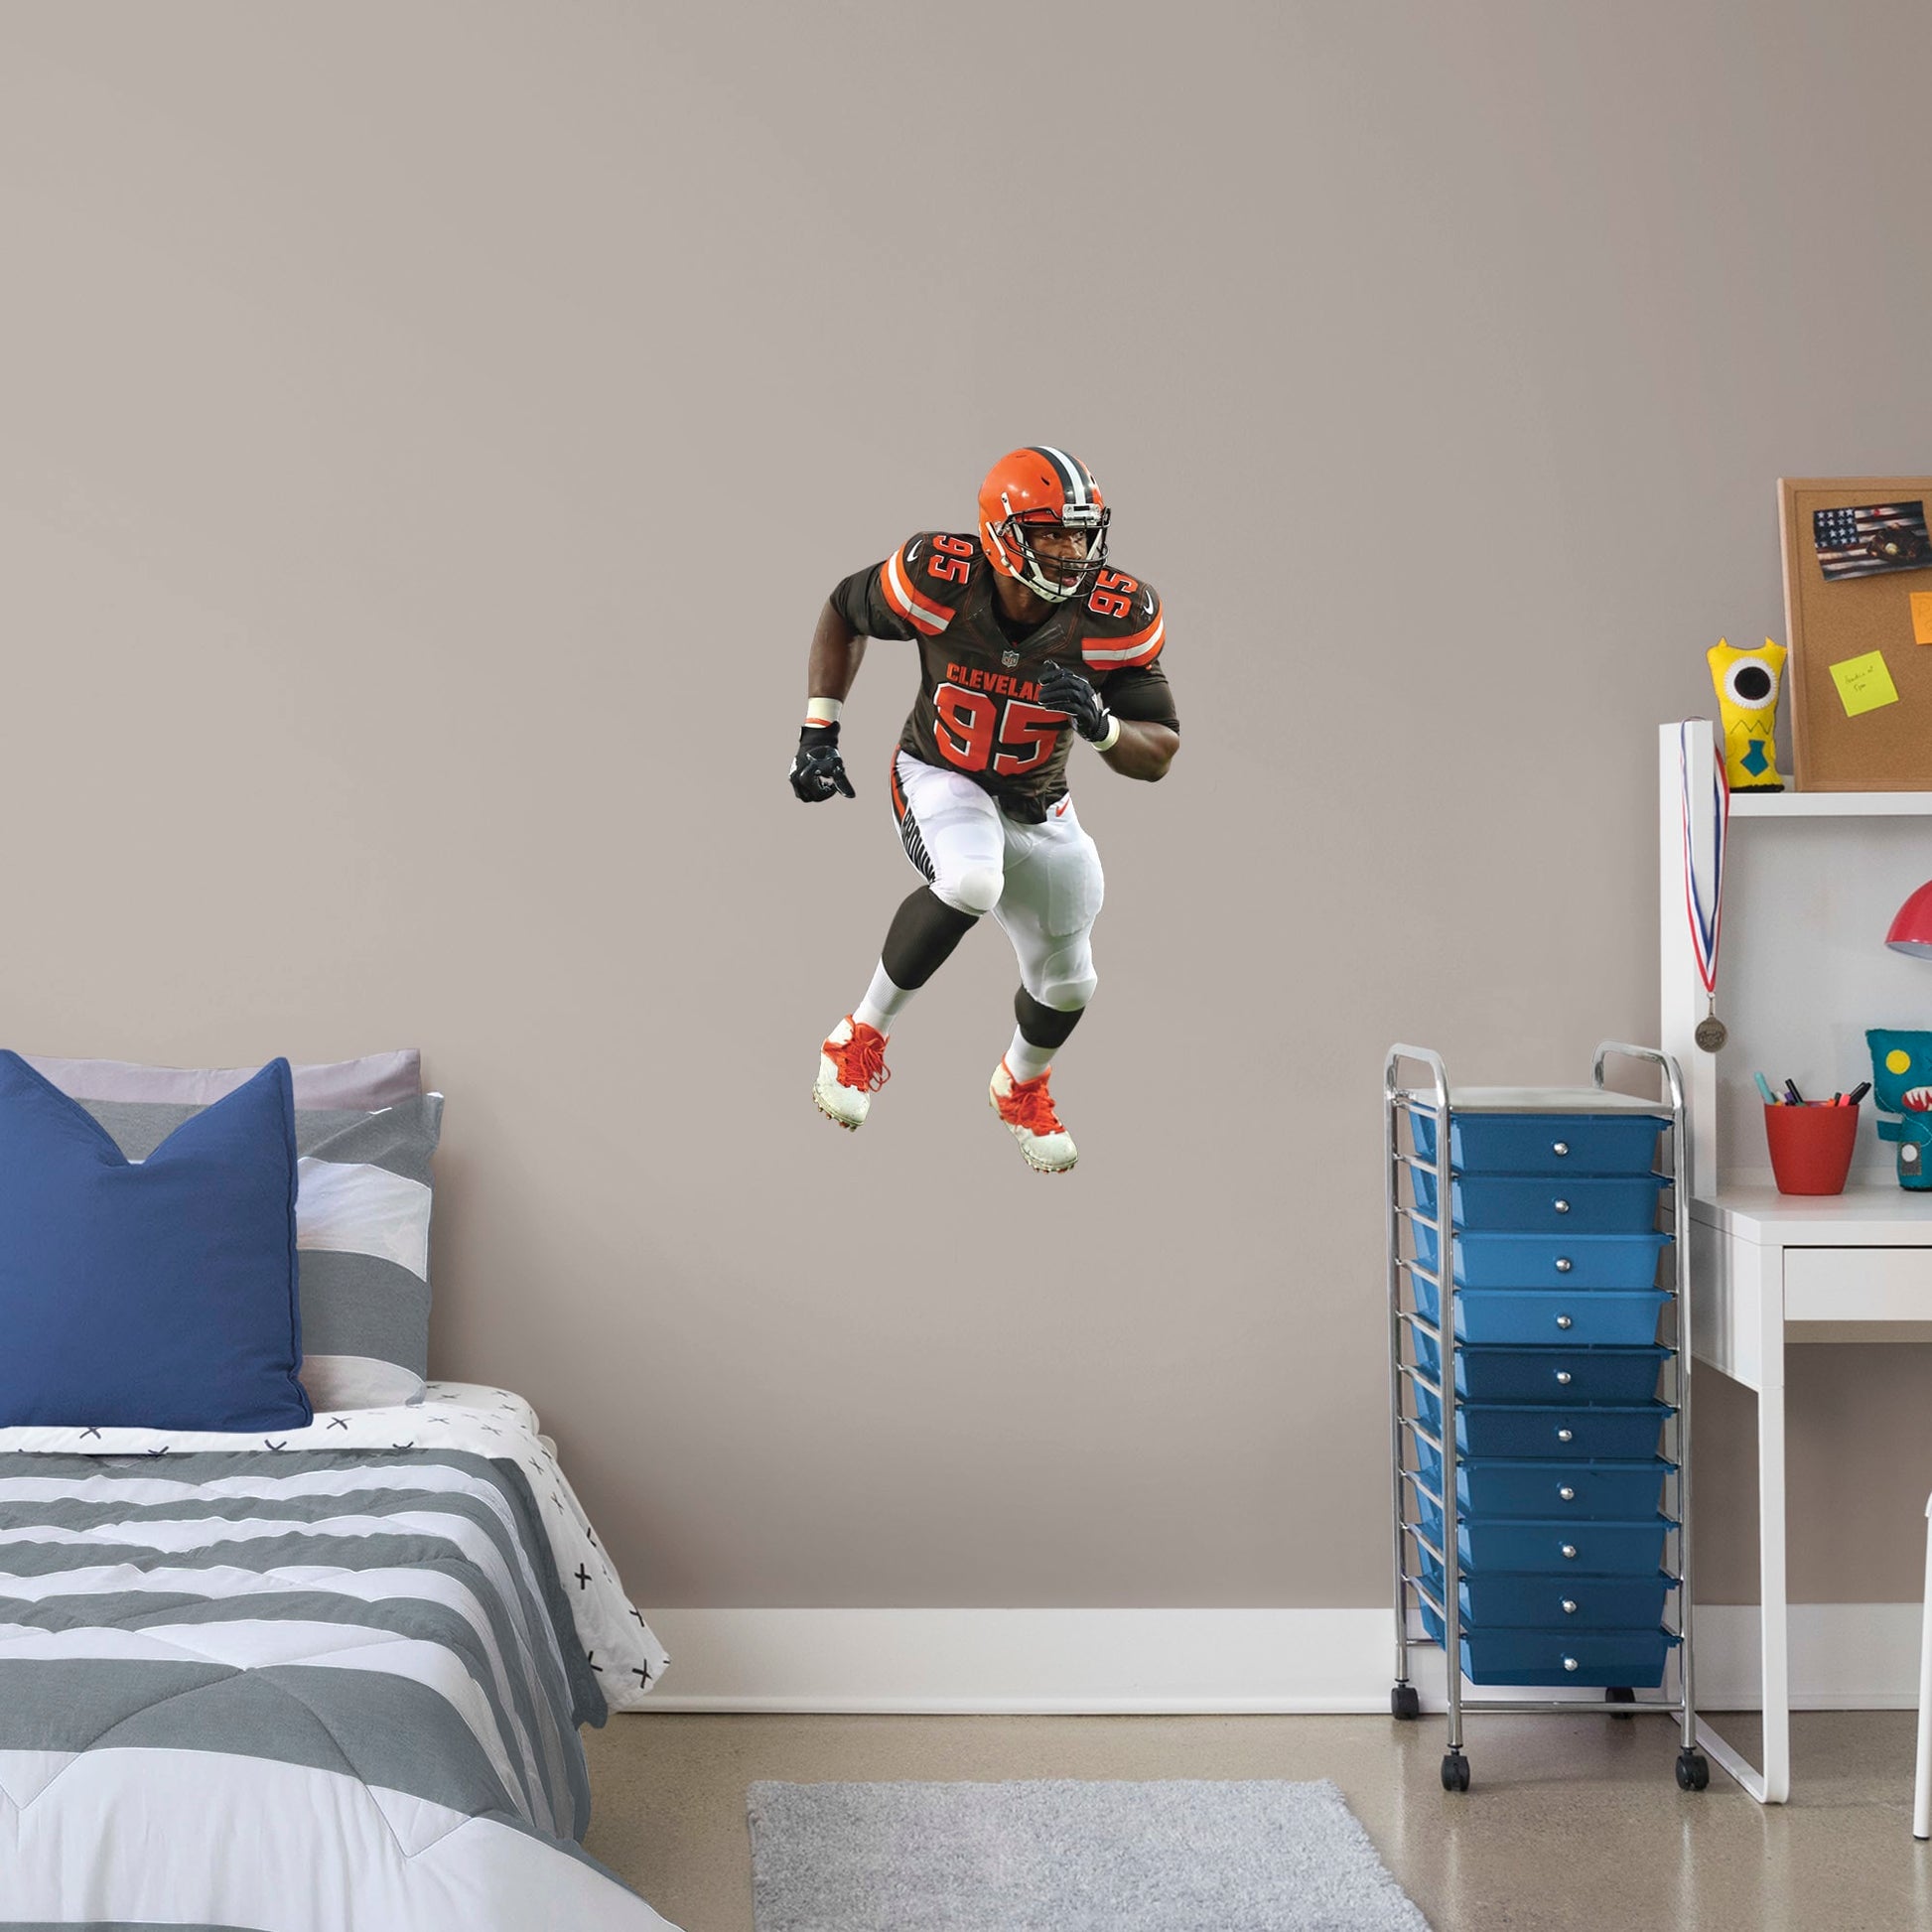 X-Large Athlete + 2 Decals (21"W x 38"H) Invite Cleveland Browns defensive end Myles Garrett to your personal Dawg Pound with this durable vinyl wall decal. The 2017 first-round draft pick and 2018 Pro Bowl qualifier brings his defensive skills to your bedroom, office, and dog-friendly man cave. Browns Backers will appreciate the classic brown, white, and Cleveland orange, but you don't have to stay in Cleveland. Take this easily reusable decal on the road to wherever life takes you.